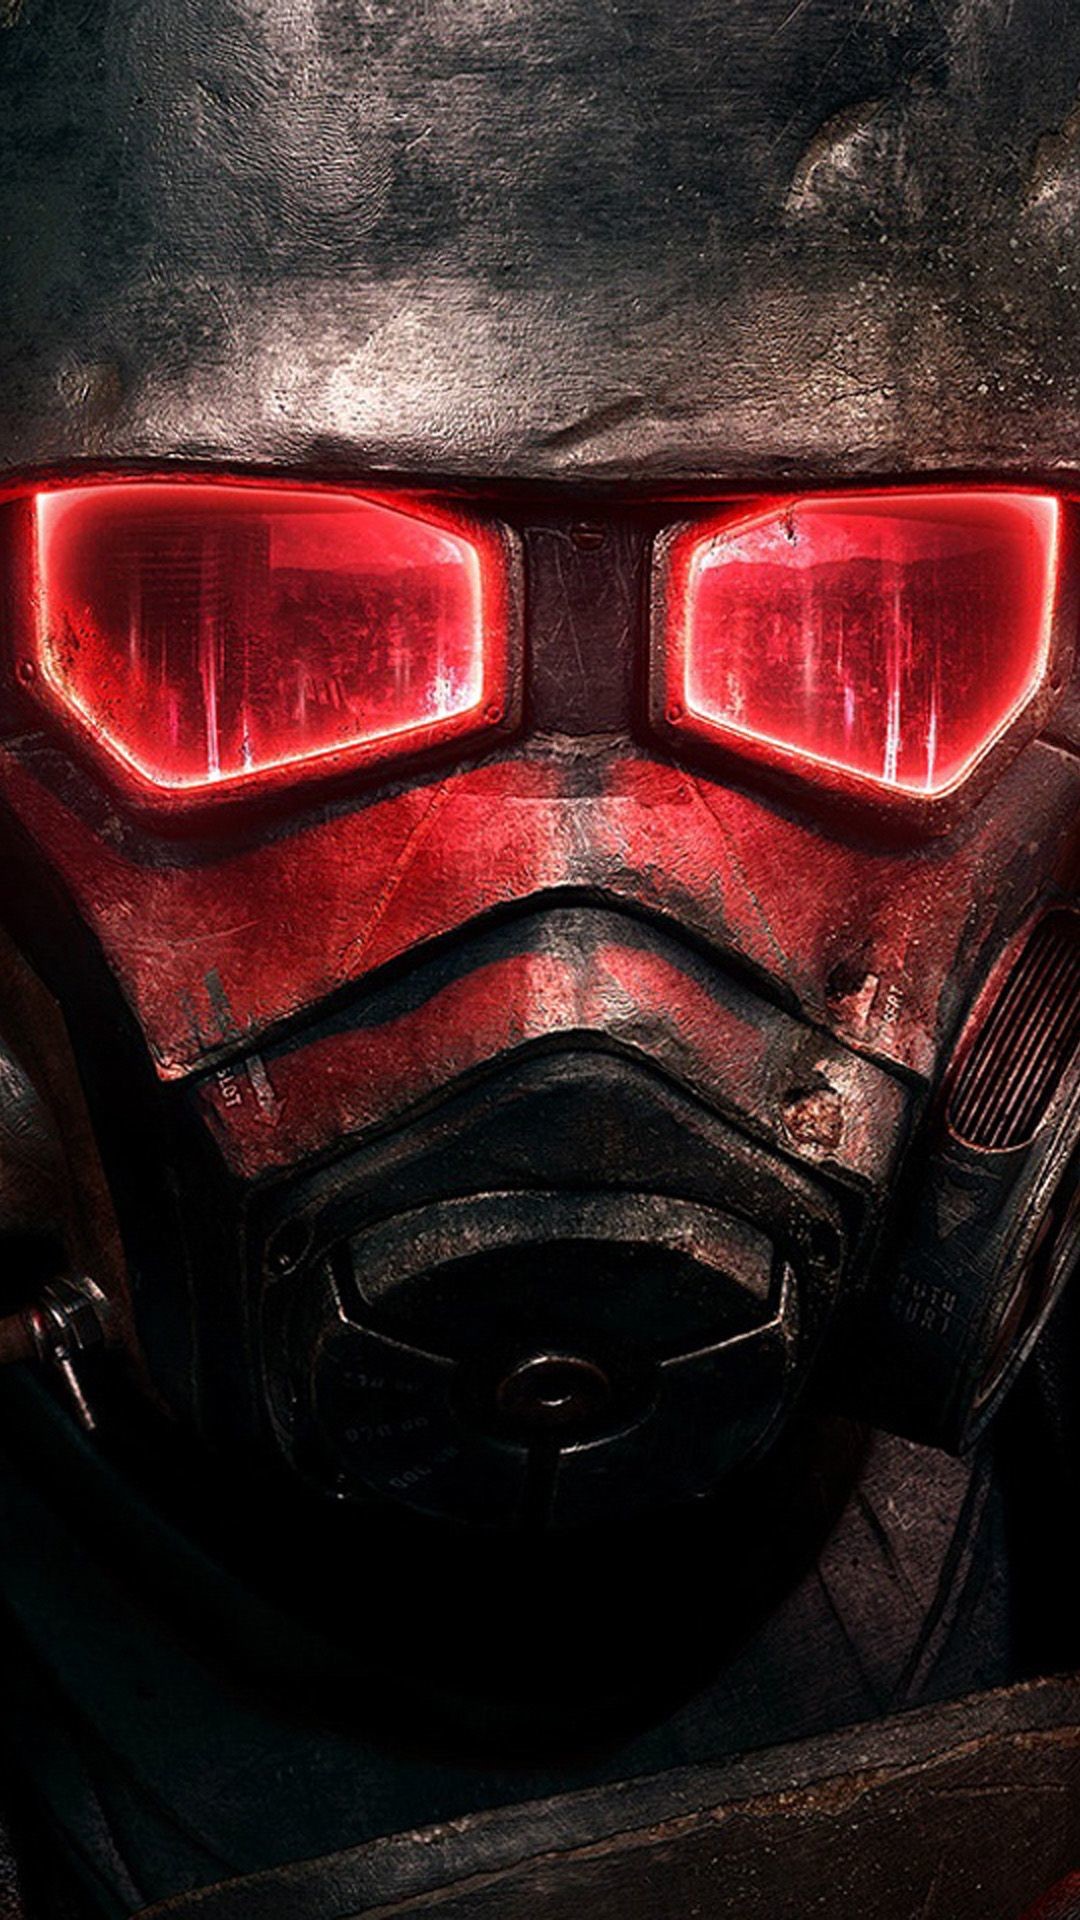 1080x1920 iPhone 6 plus Fallout new vegas game Games wallpaper